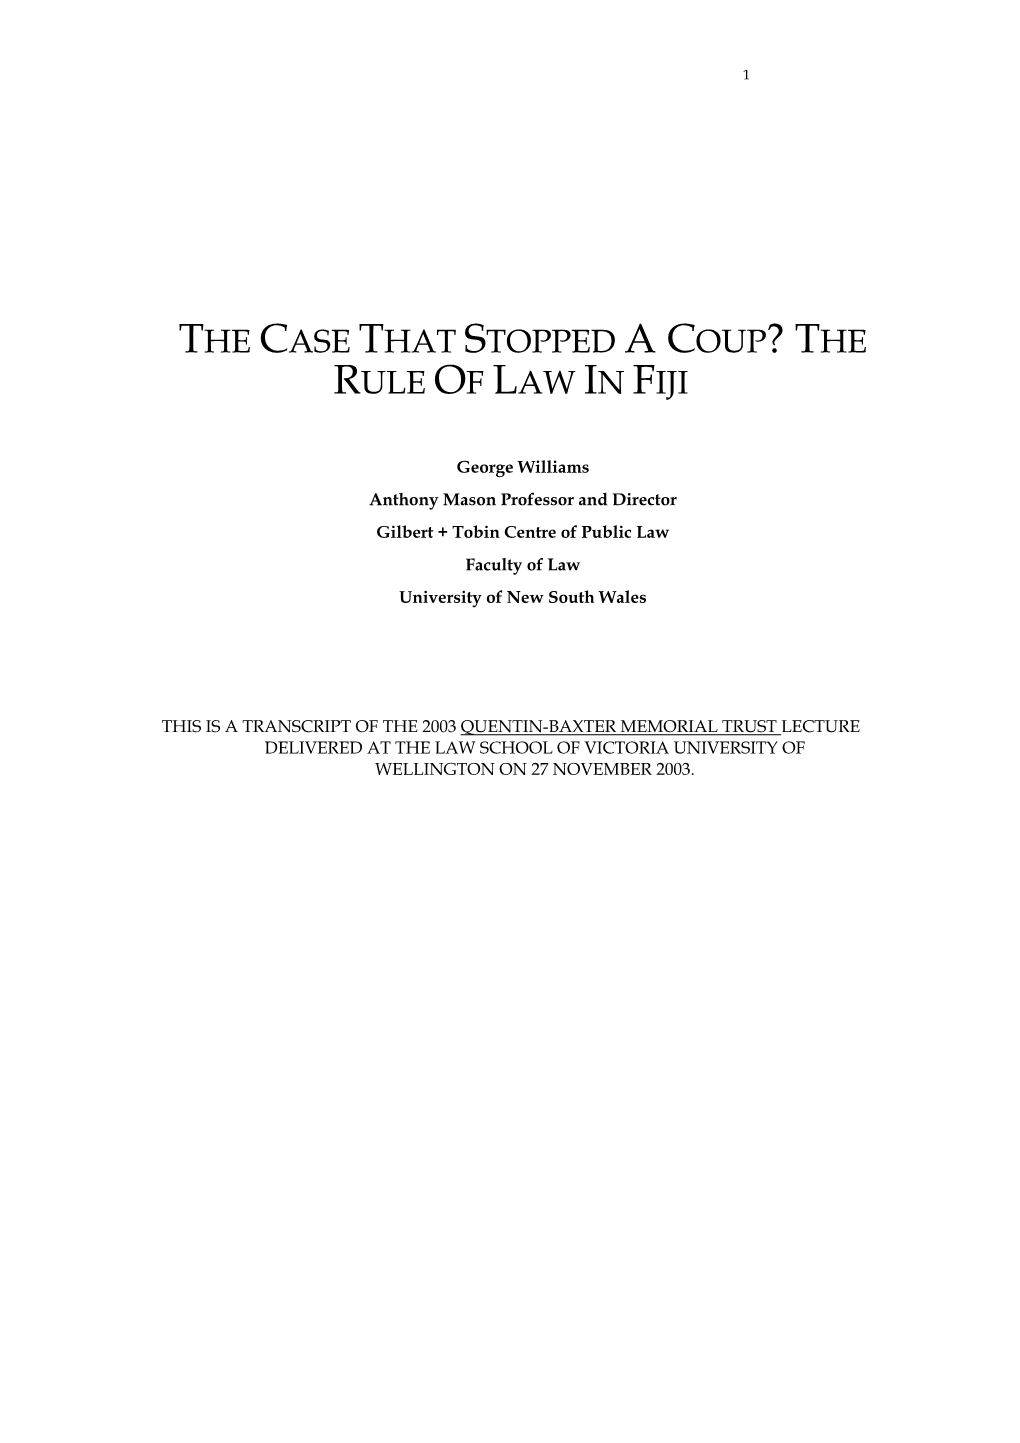 The Case That Stopped the Coup? the Rule of Law in Fiji